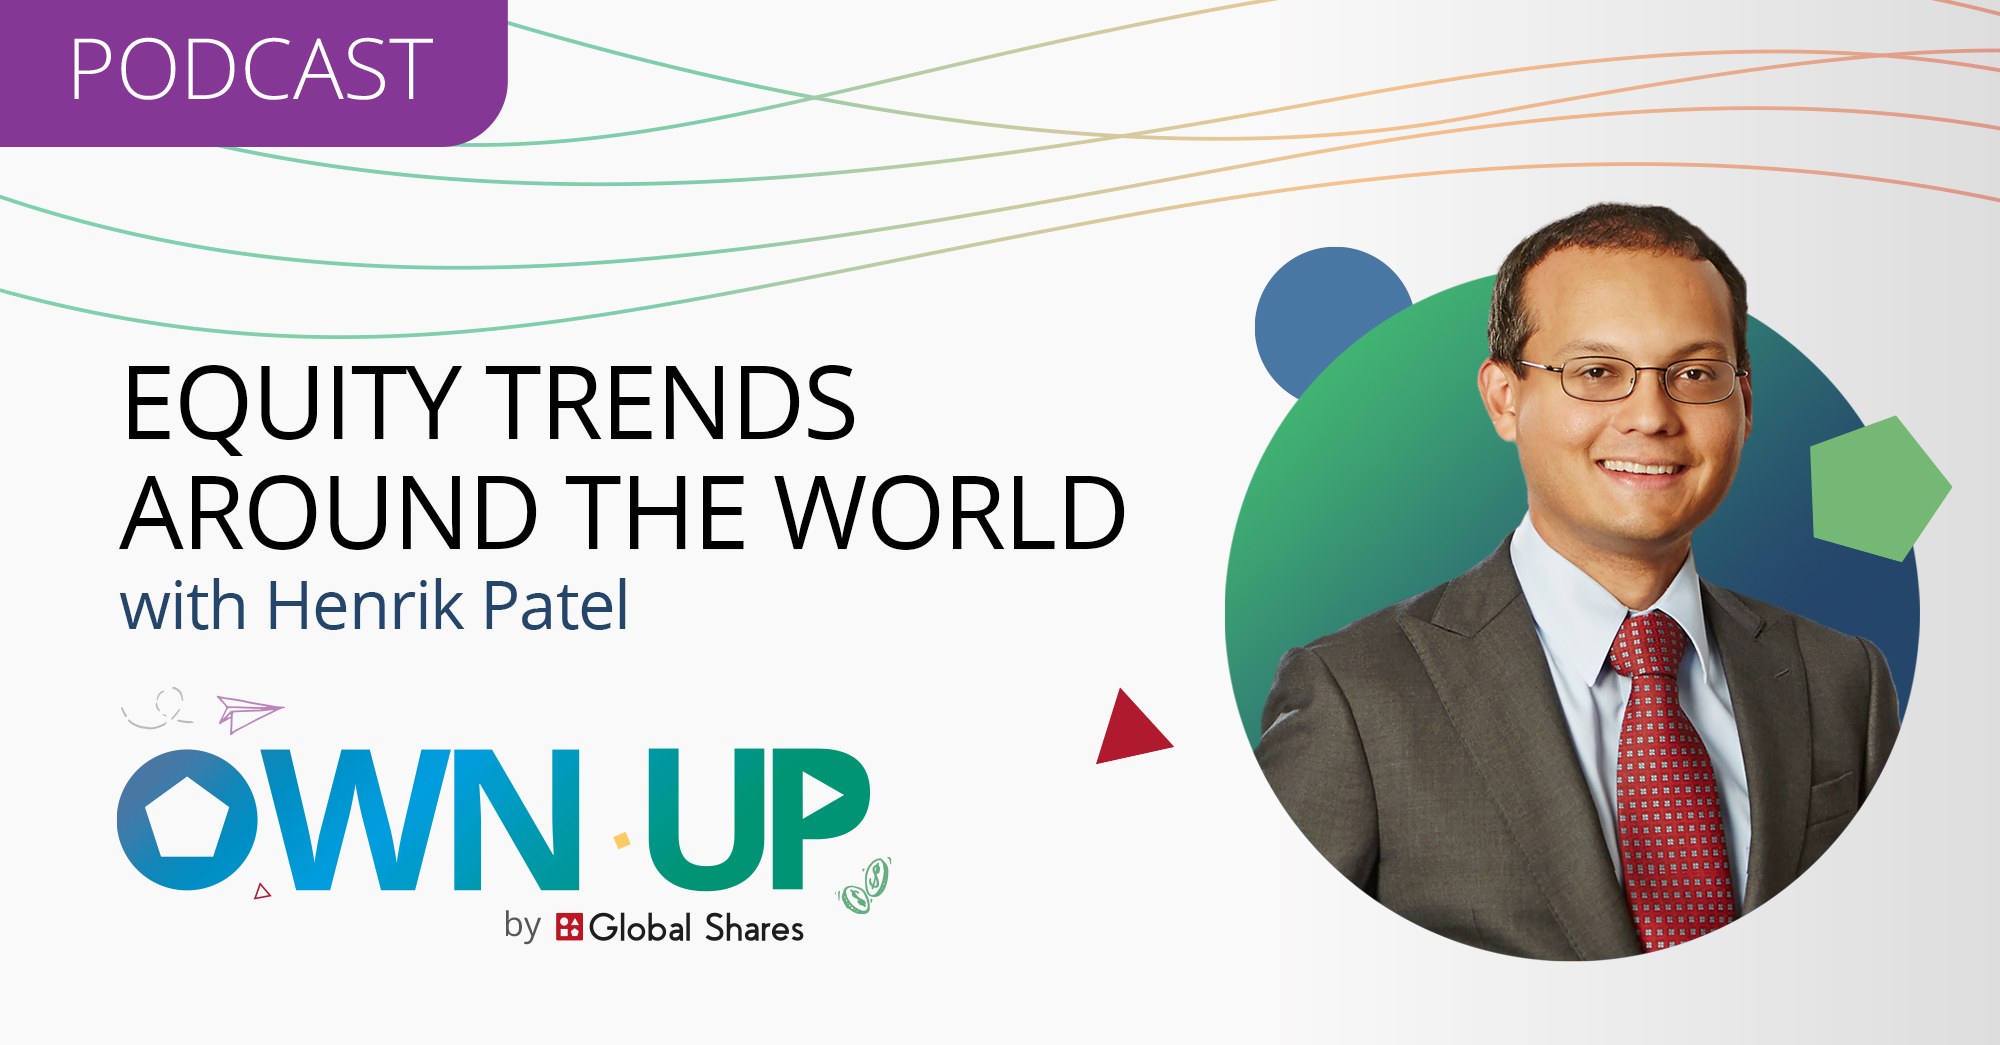 Own Up Podcast: Equity Trends Around the World with Henrik Patel